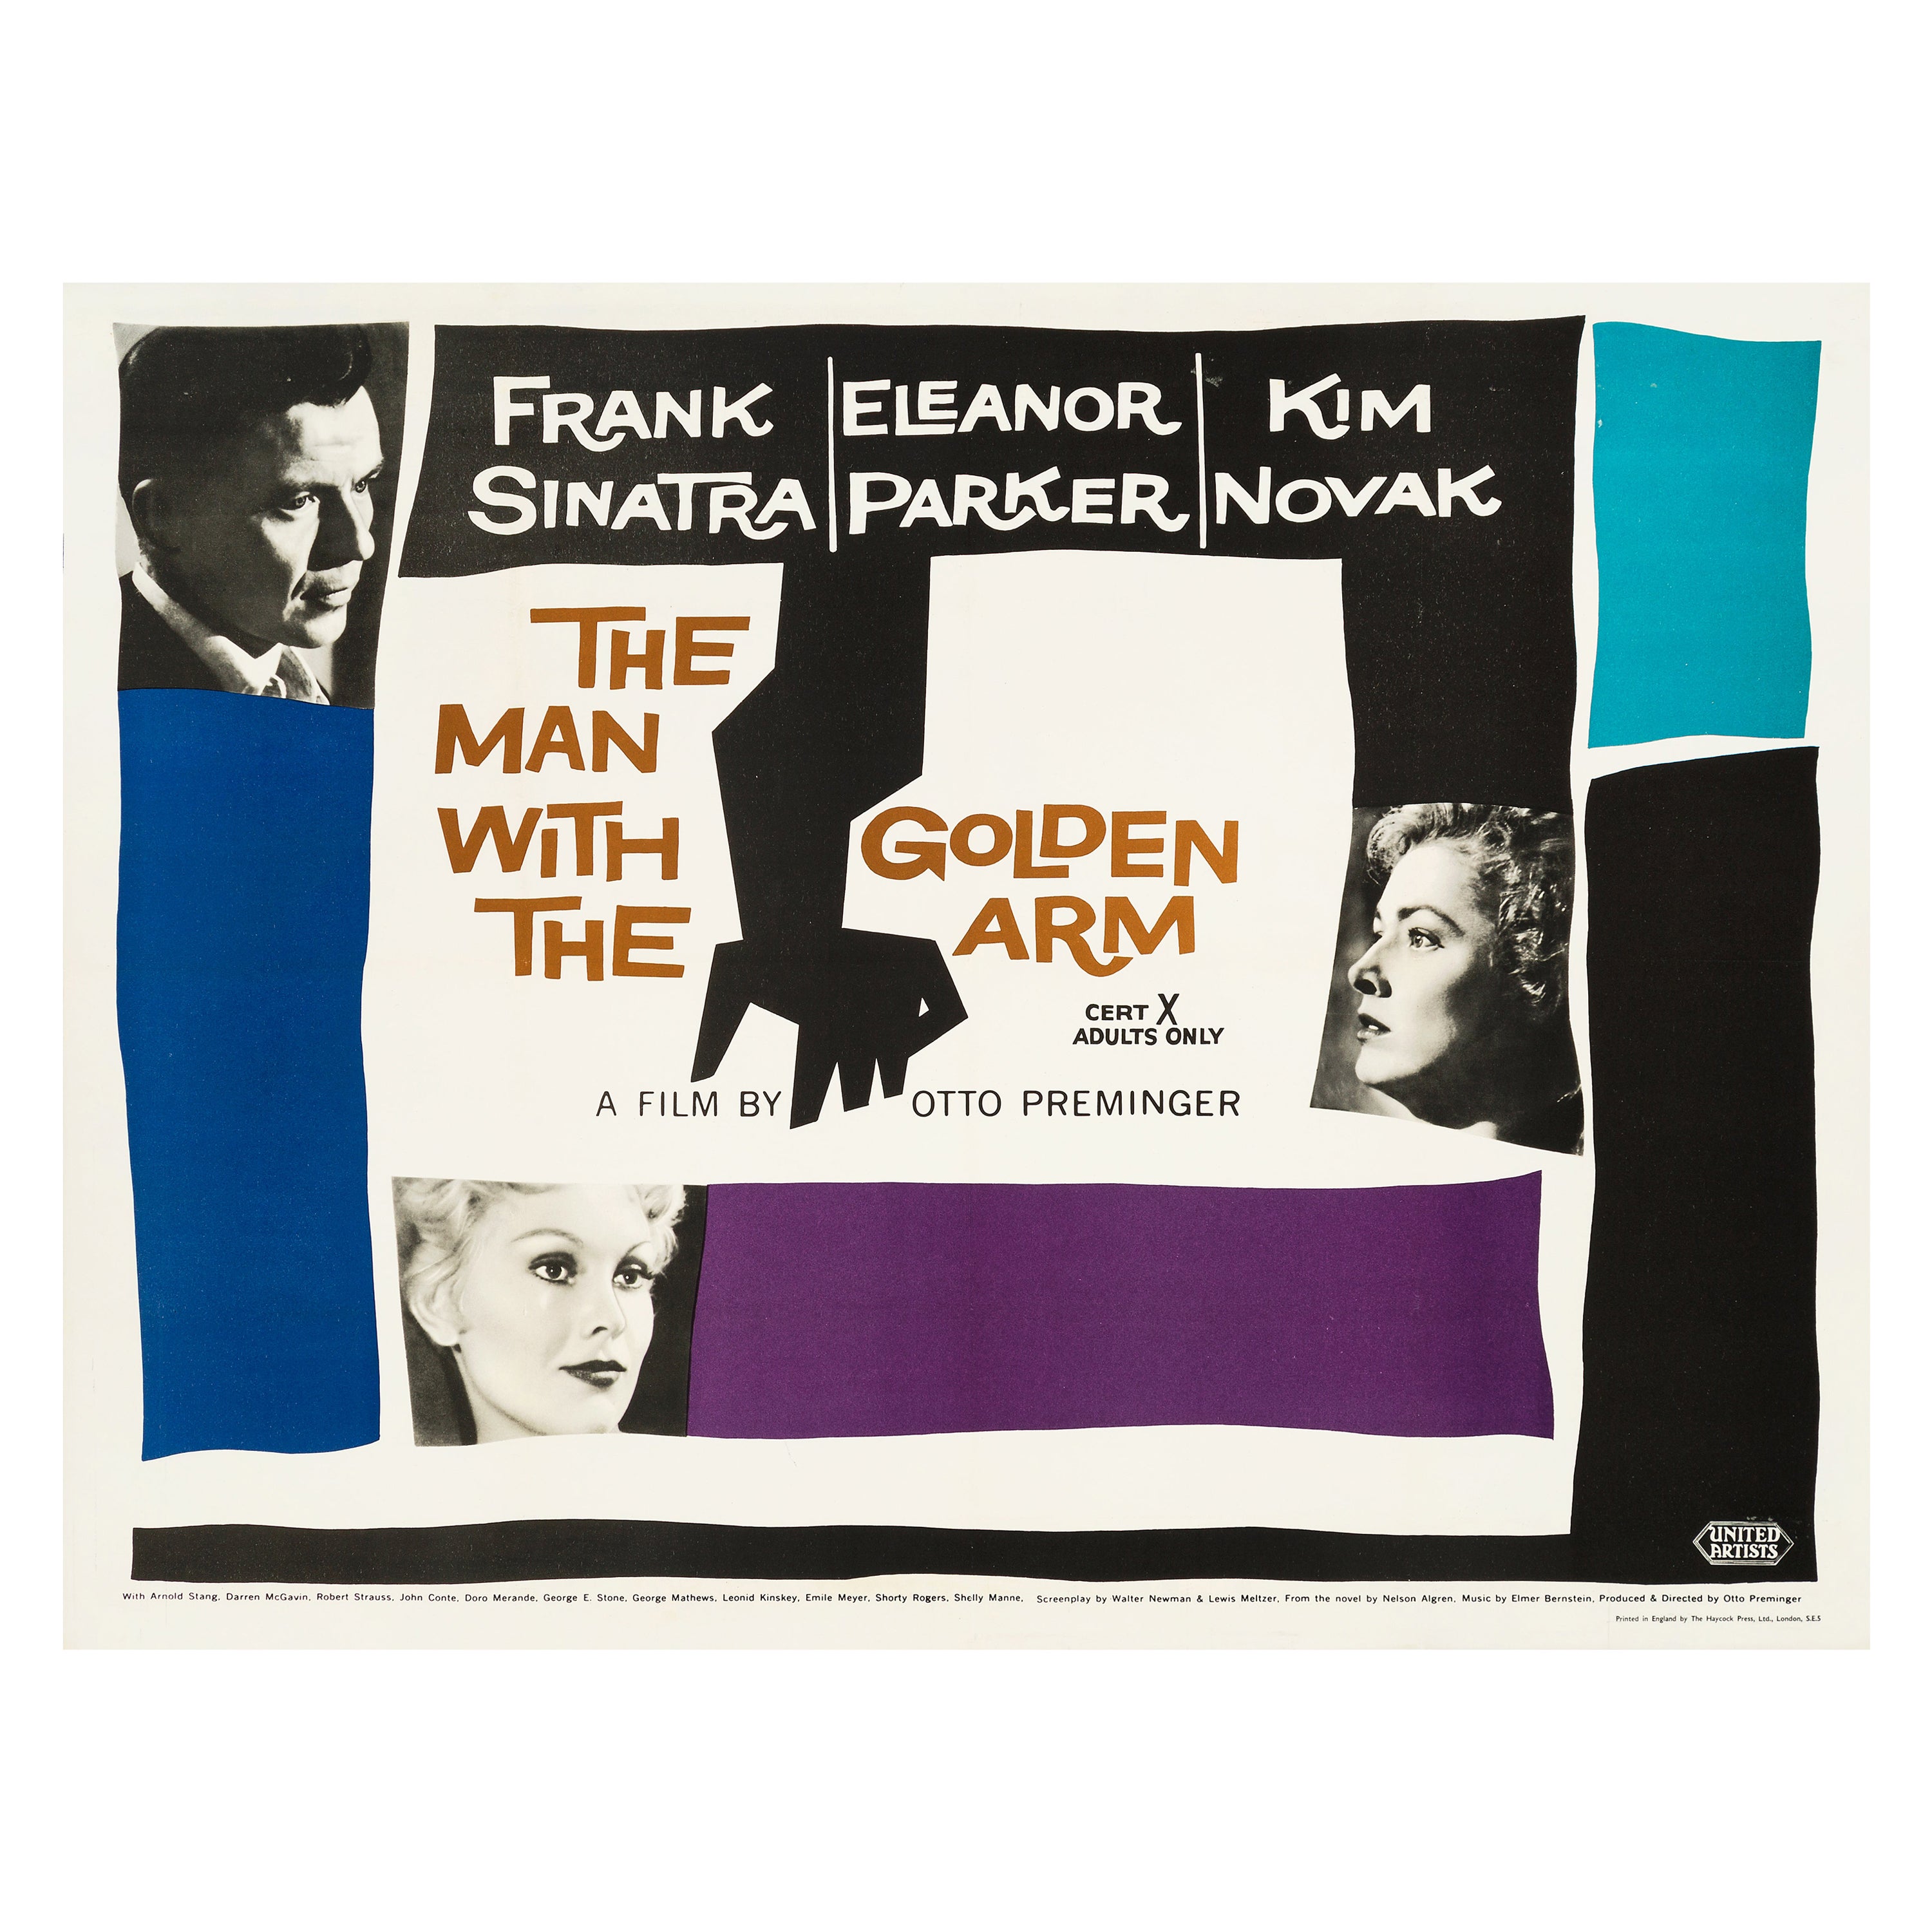 'The Man with the Golden Arm' Original Movie Poster by Saul Bass, British, 1956